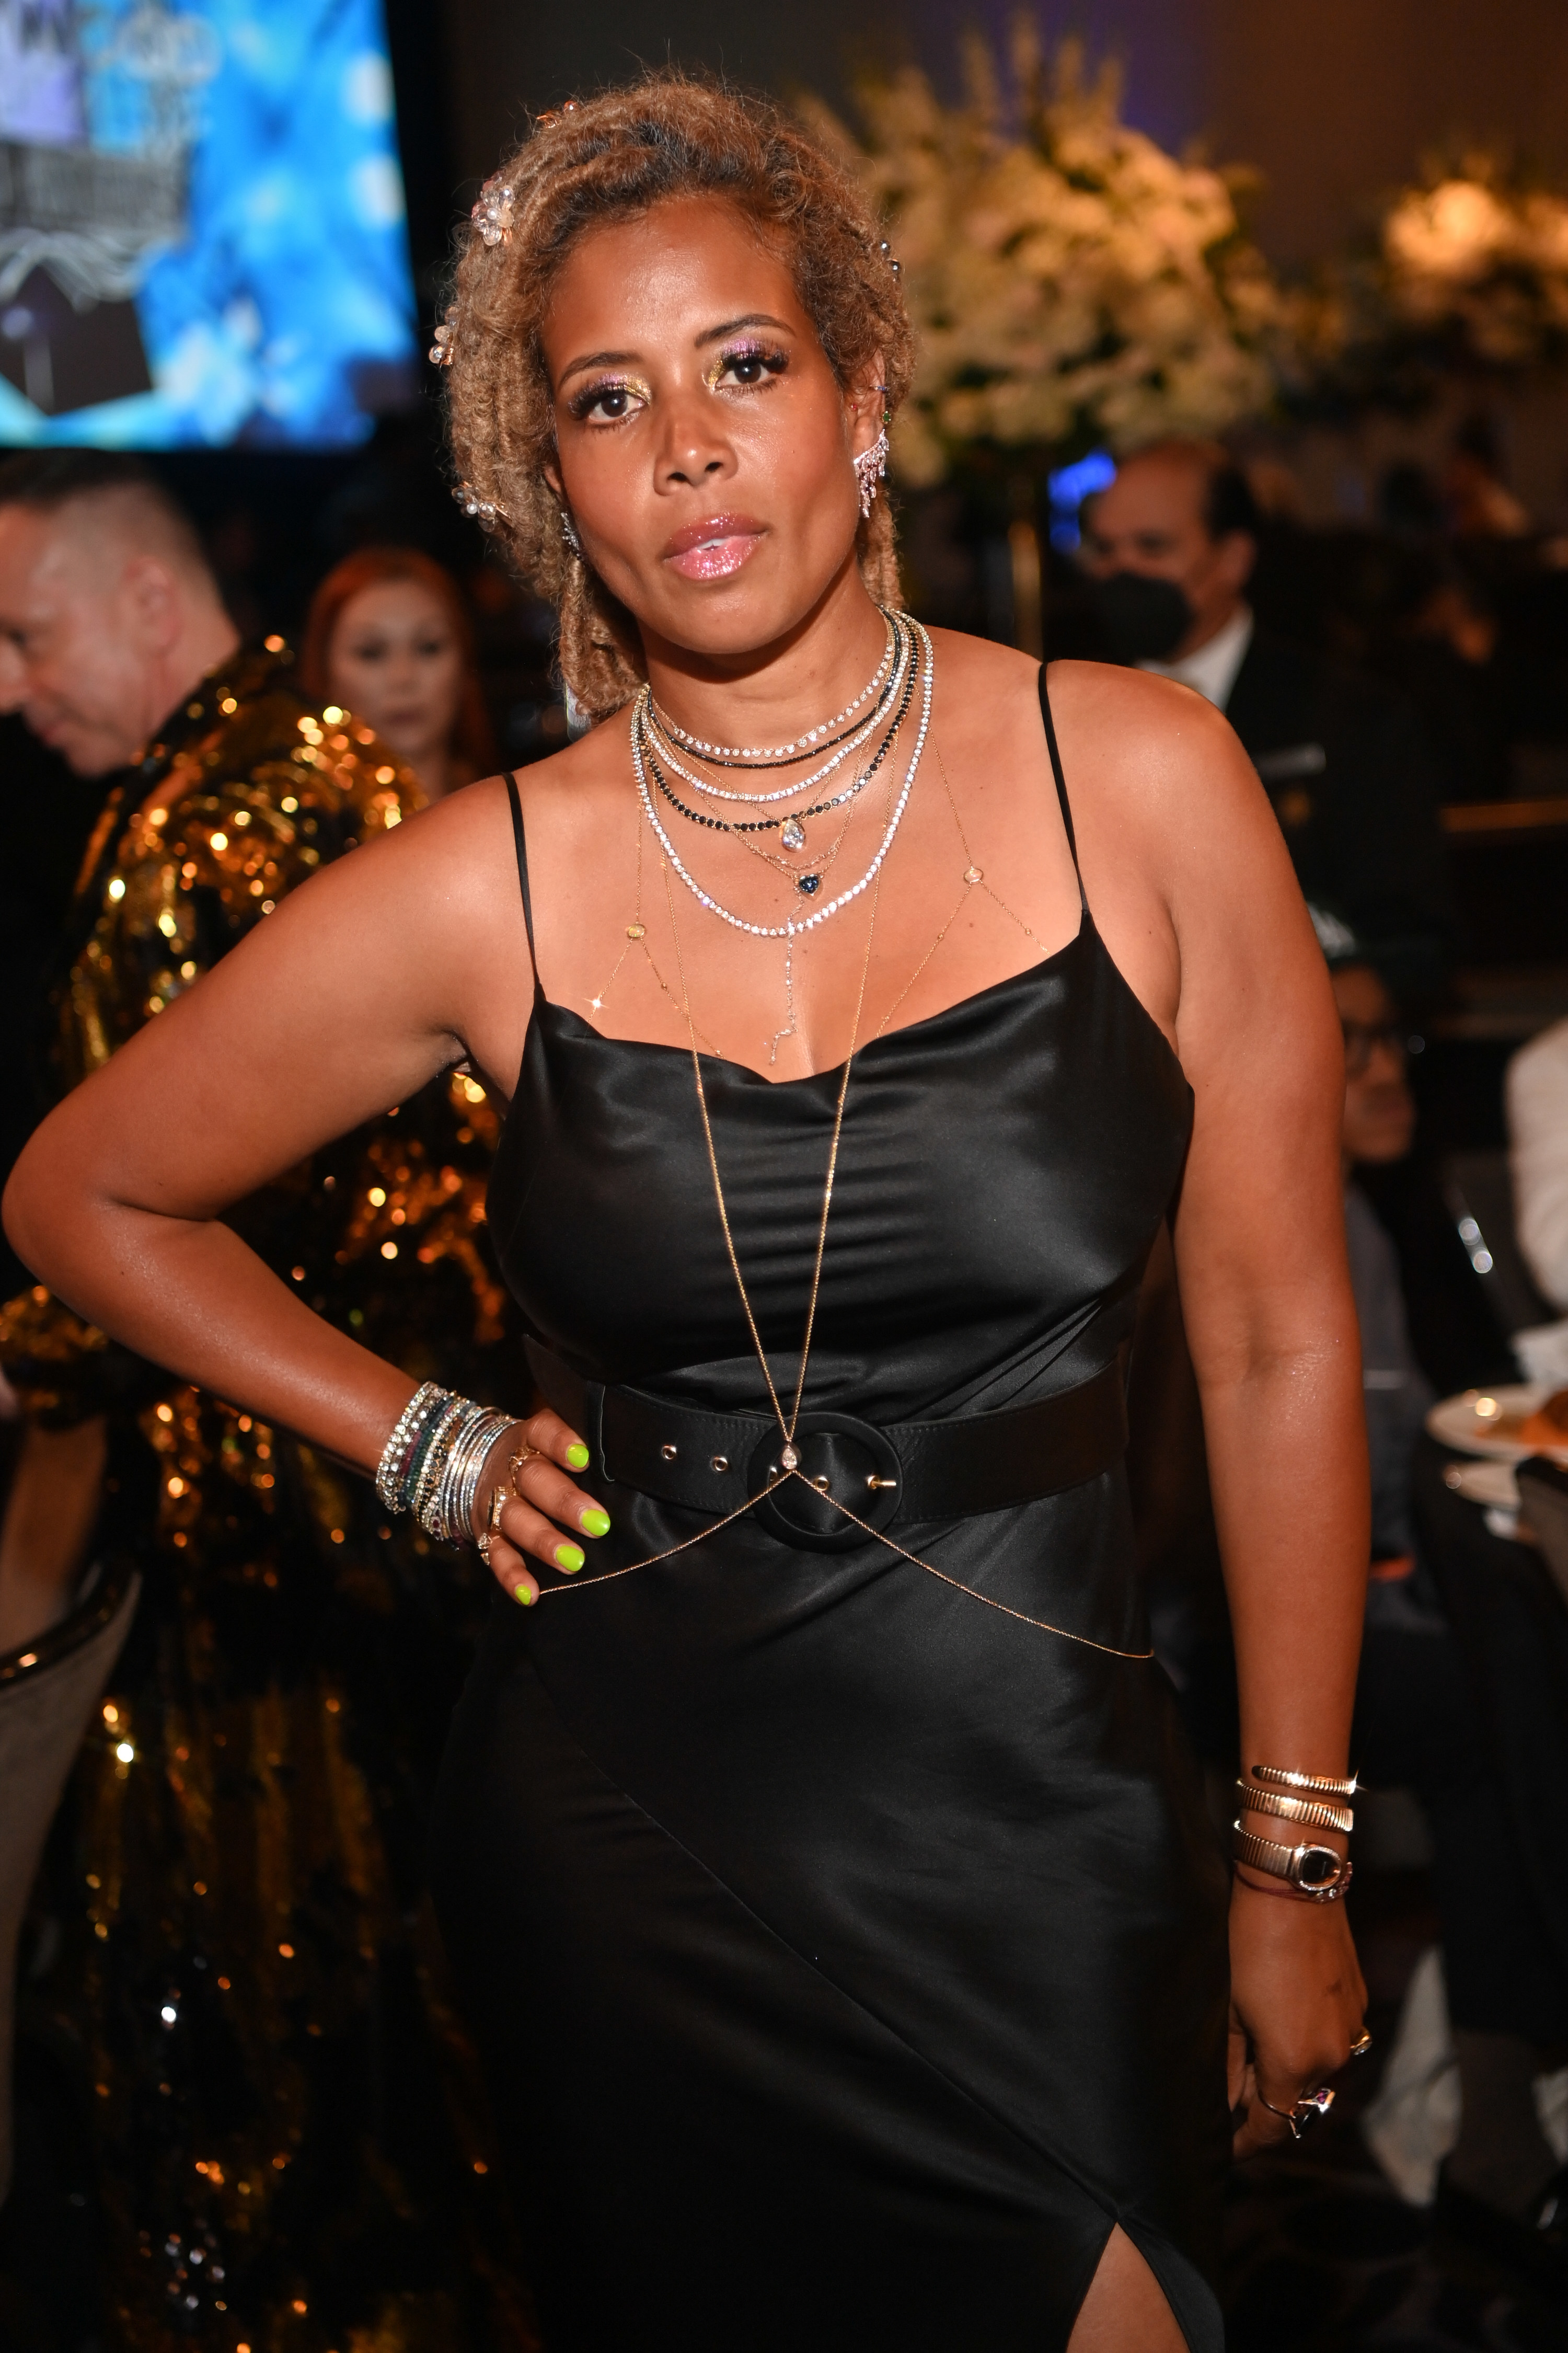 Kelis at an event poses for a photo with her hand on her hip